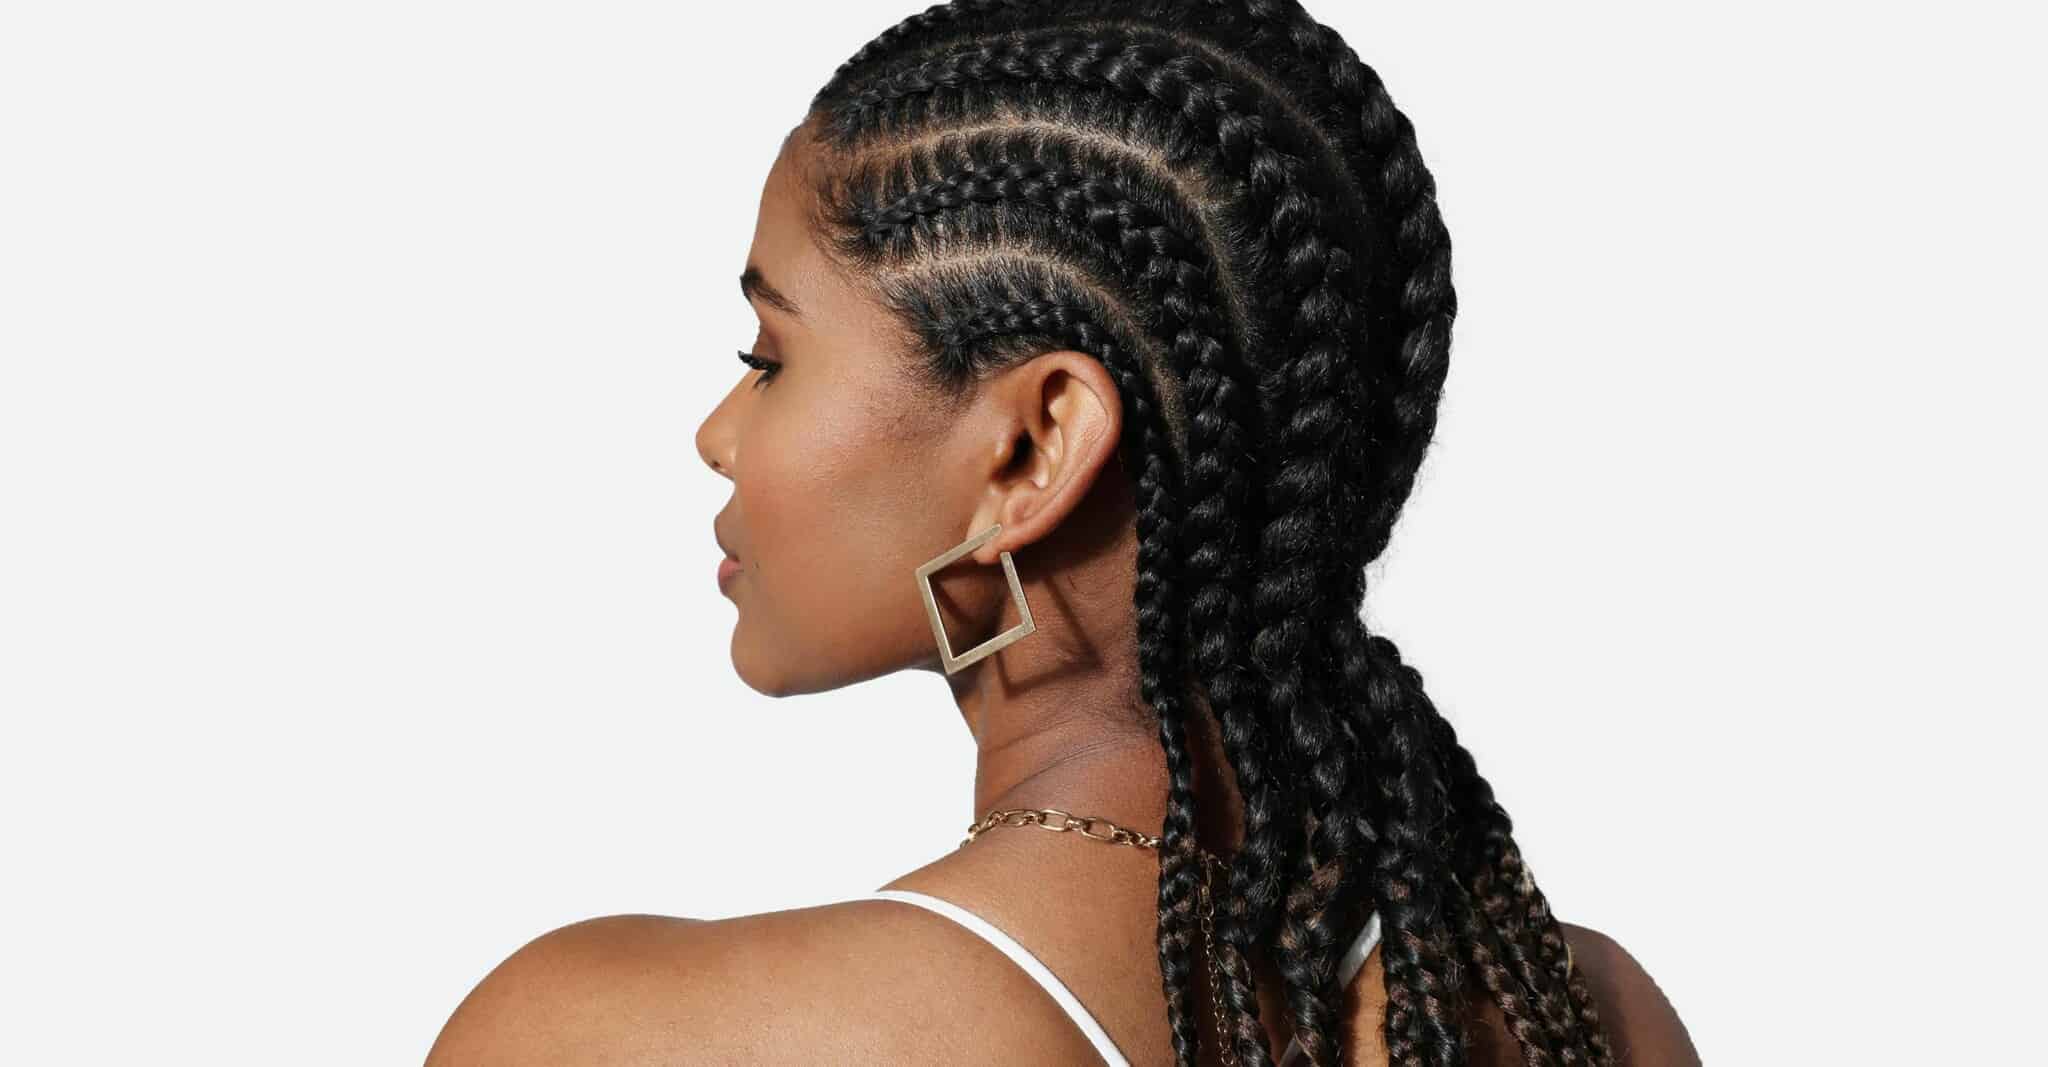 31 Hairstyles With Braids for Black Women to Try StyleSeat